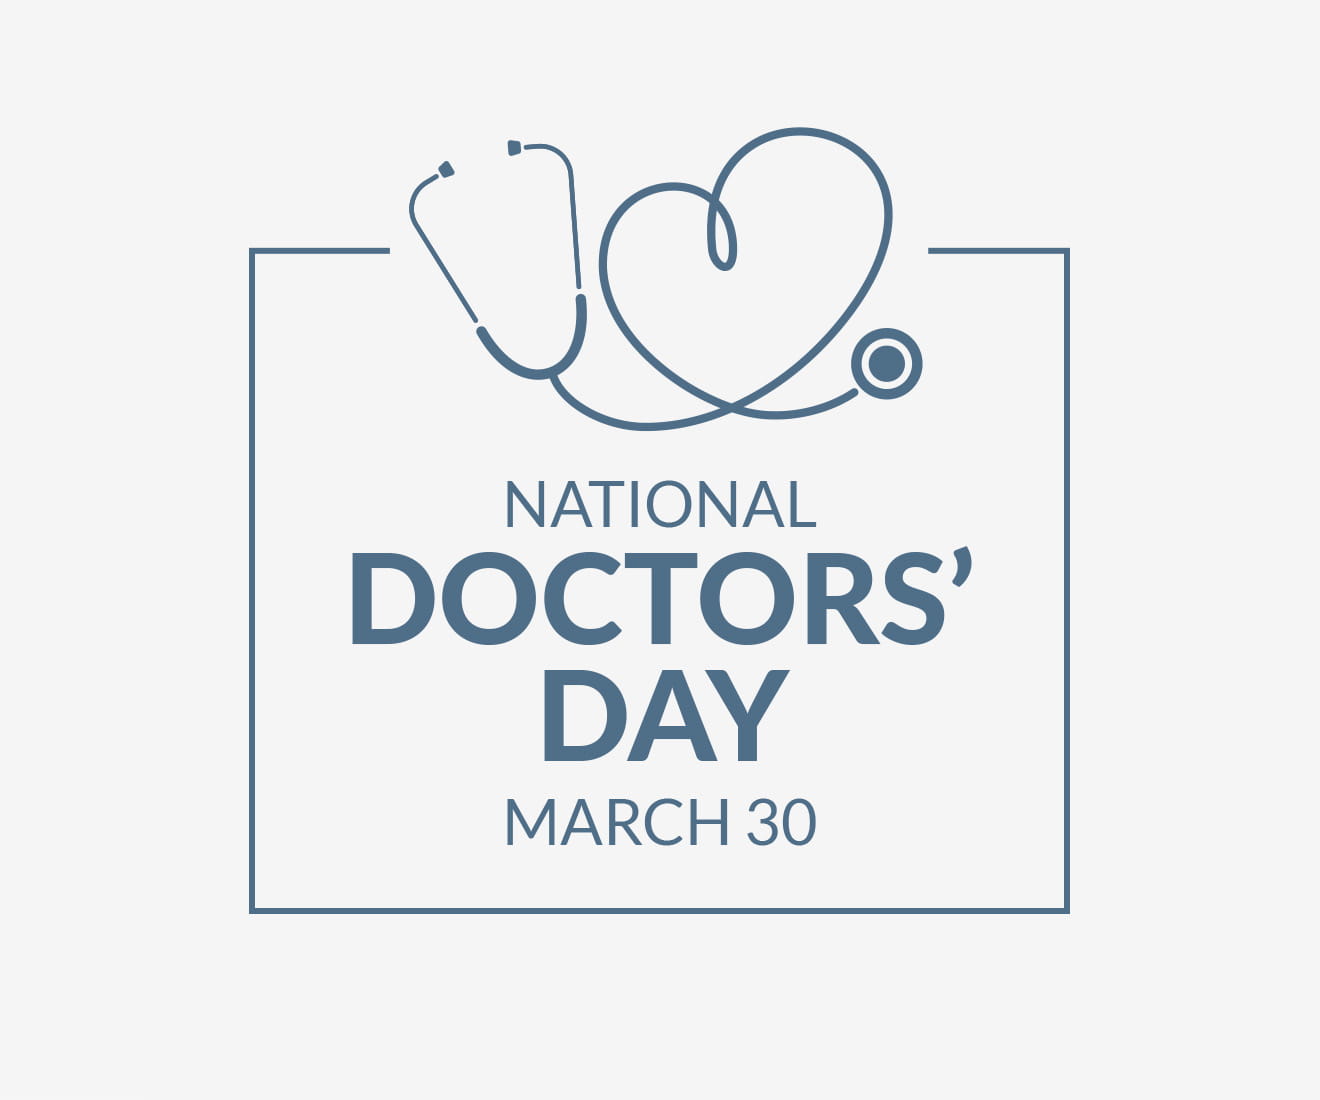 National Doctors' Day March 30